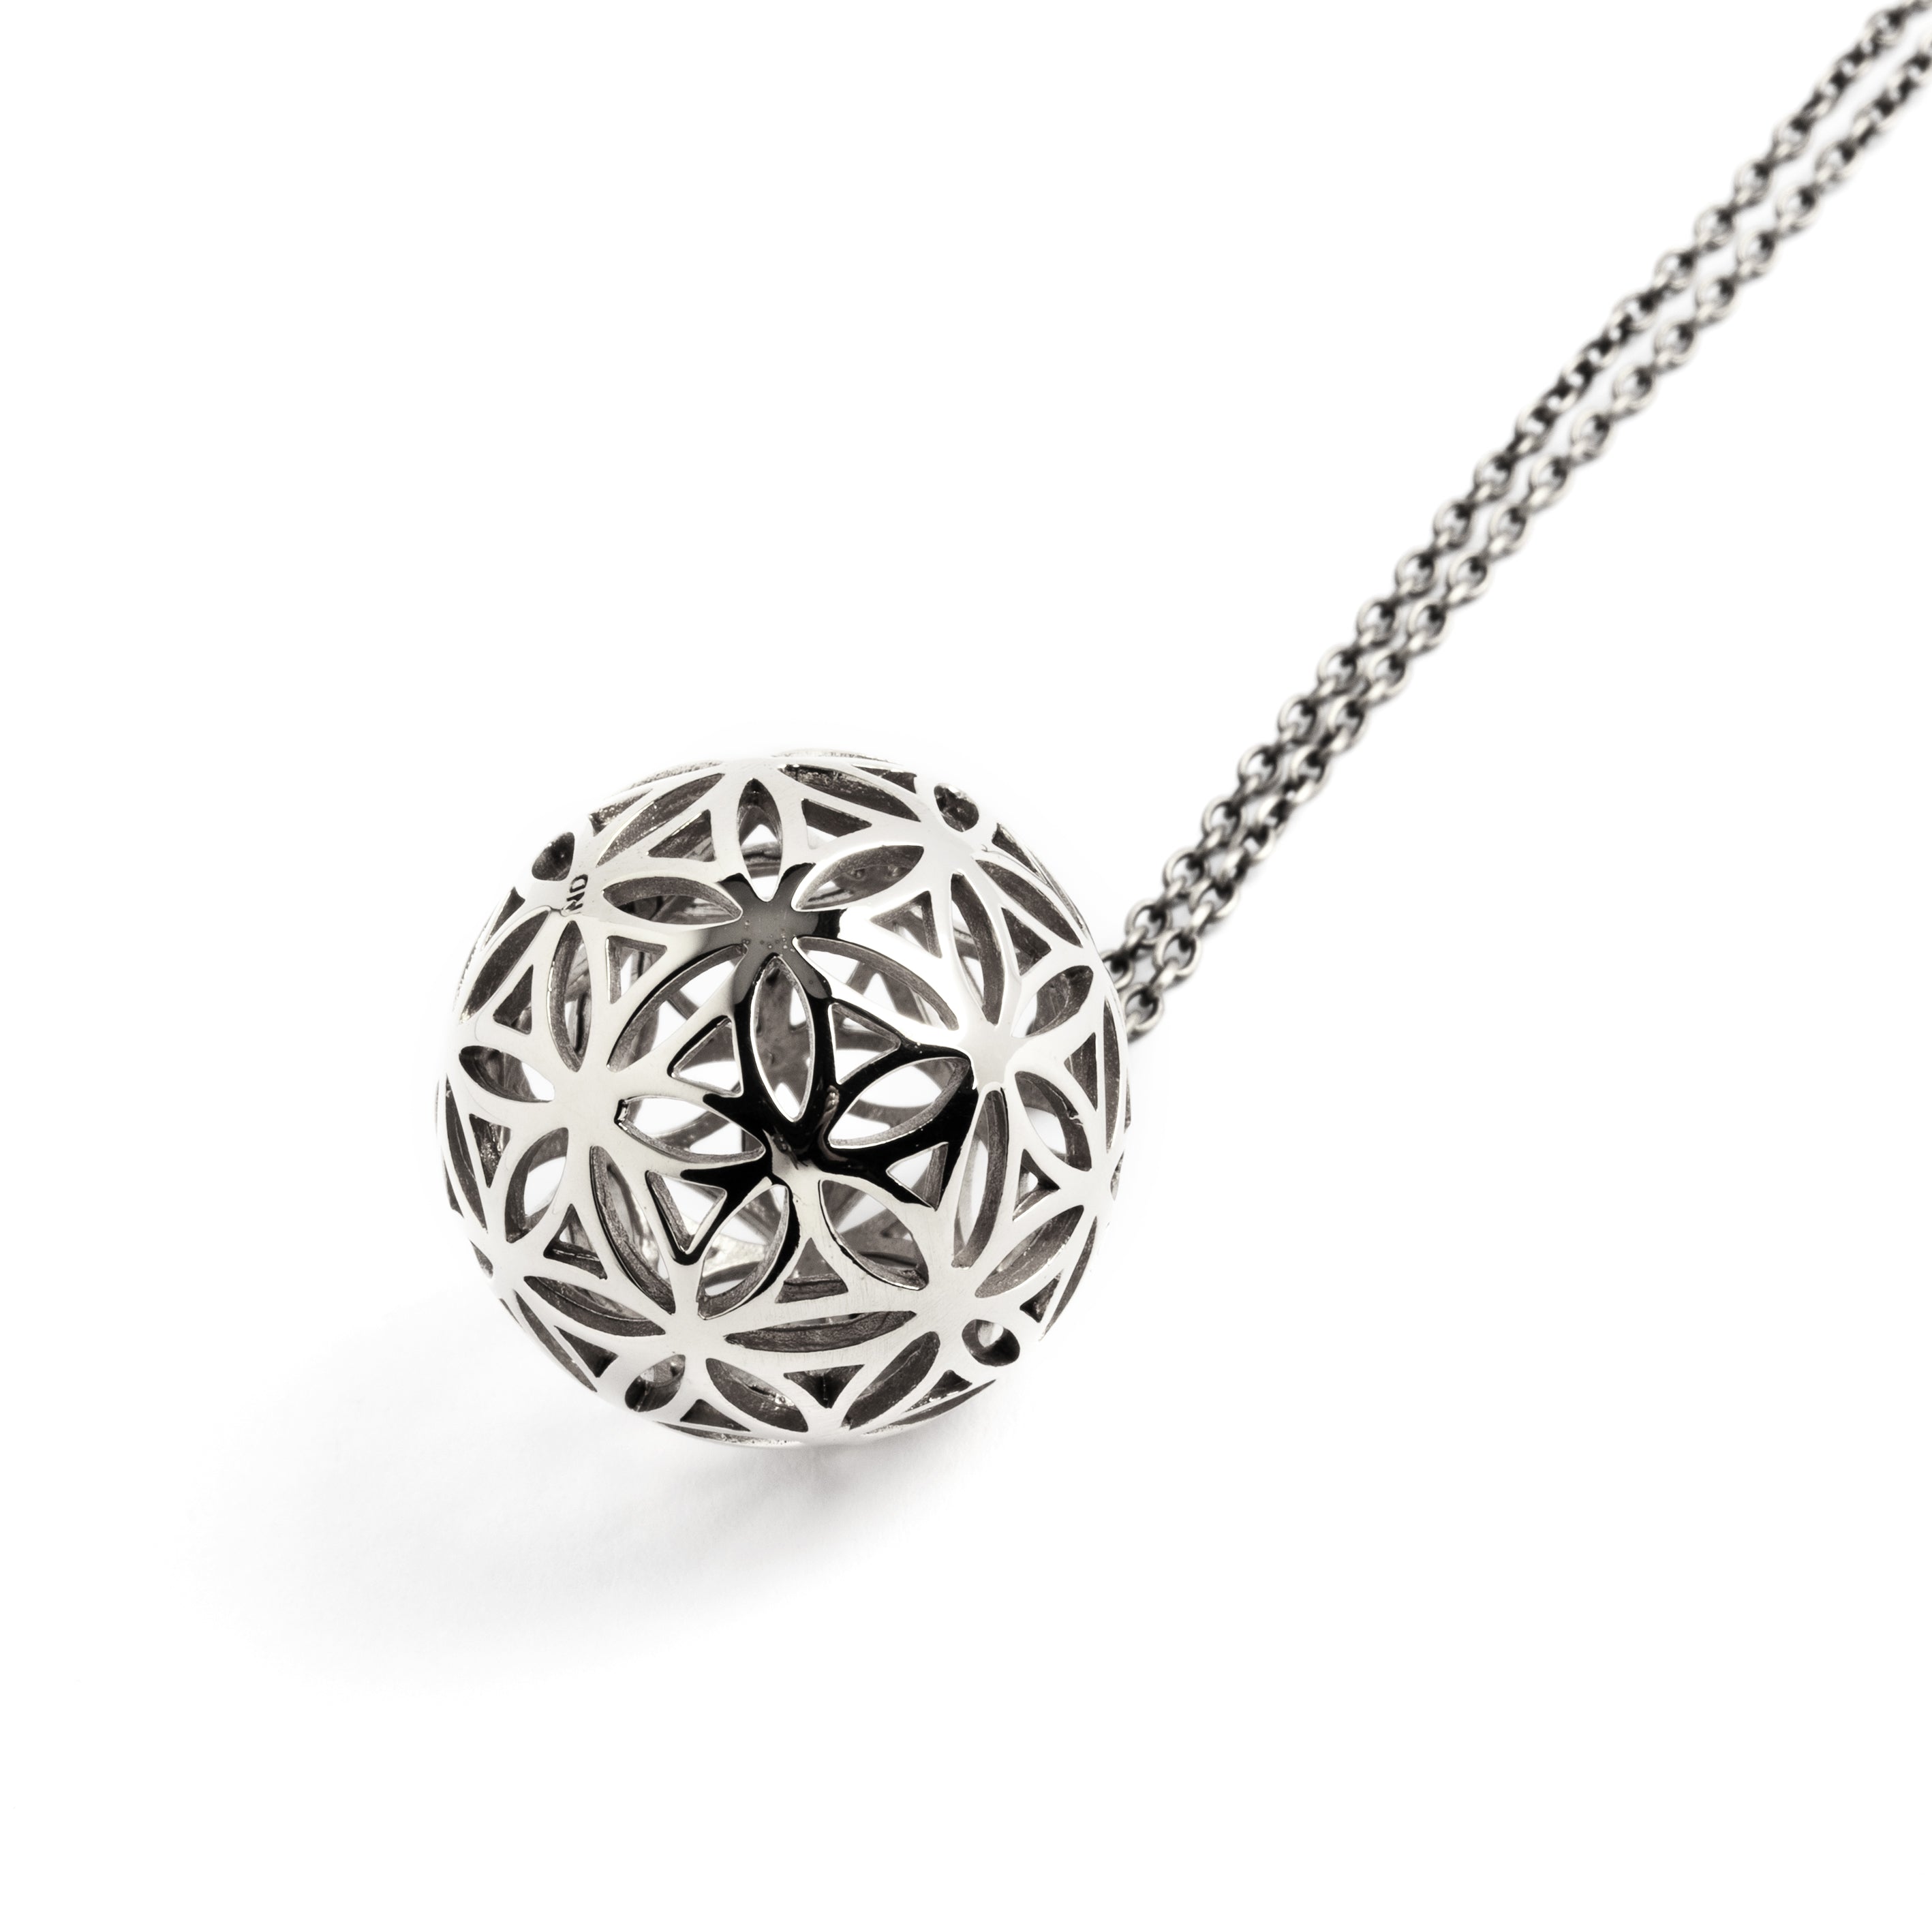 Flower of Life Silver Sphere Pendant necklace right side view